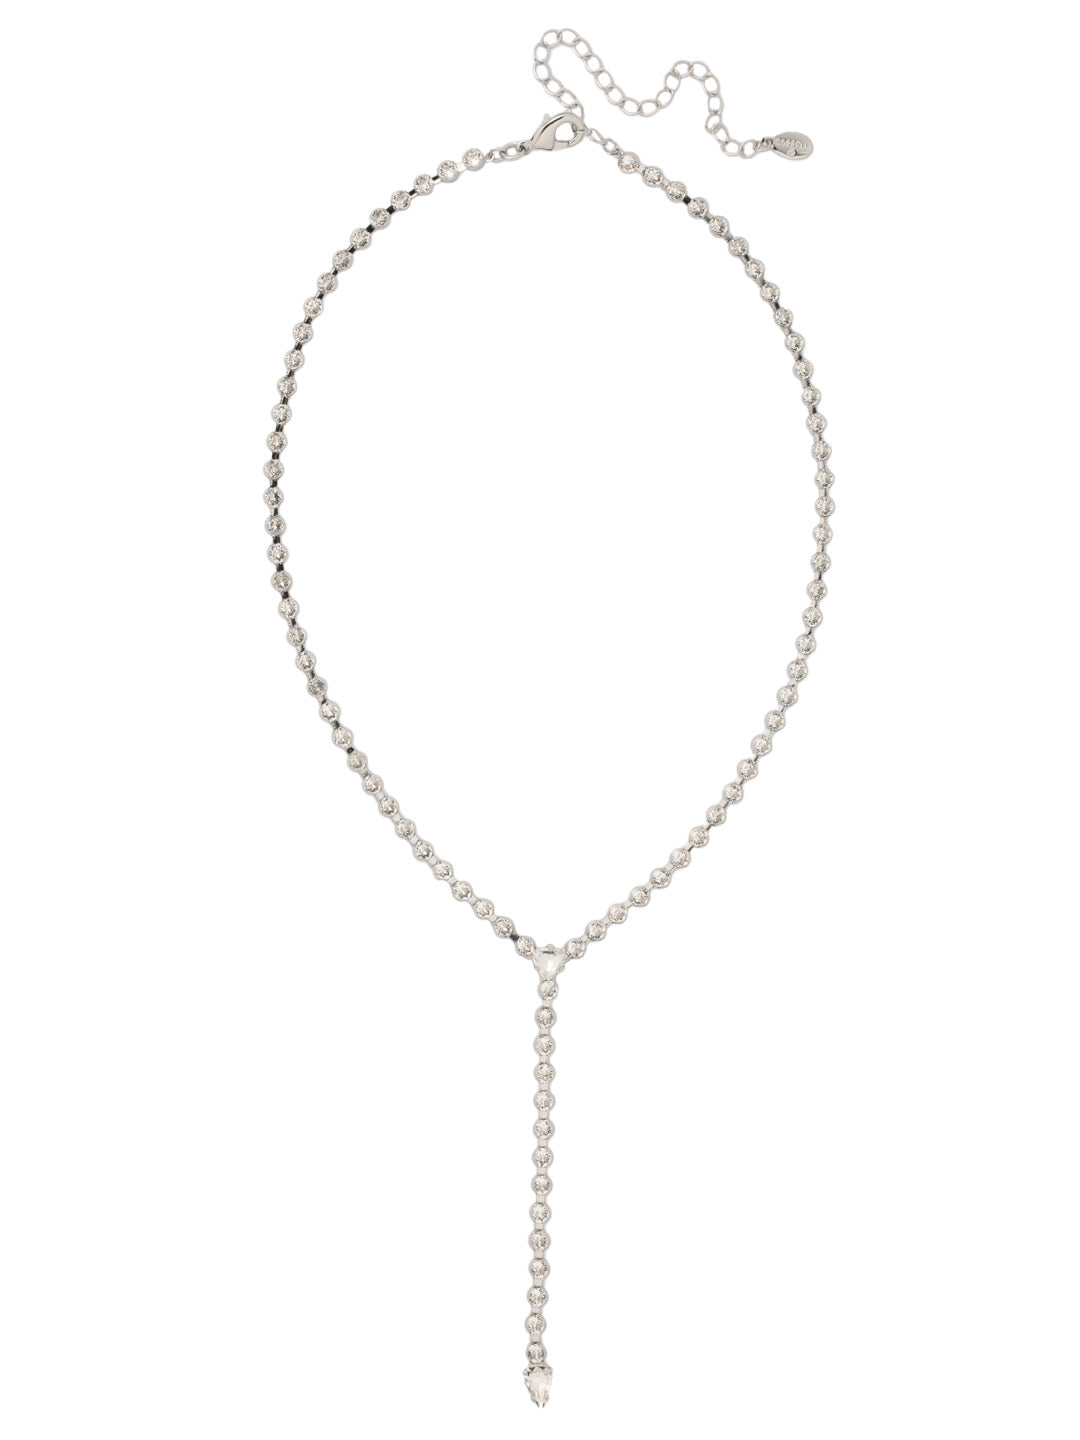 Lena Lariat Long Necklace - 4NFC14PDCRY - <p>The Lena Lariat Long Necklace is a gorgeous statement piece. A lariat style adjustable chain is studded with crystals, and secured with a lobster claw clasp. From Sorrelli's Crystal collection in our Palladium finish.</p>